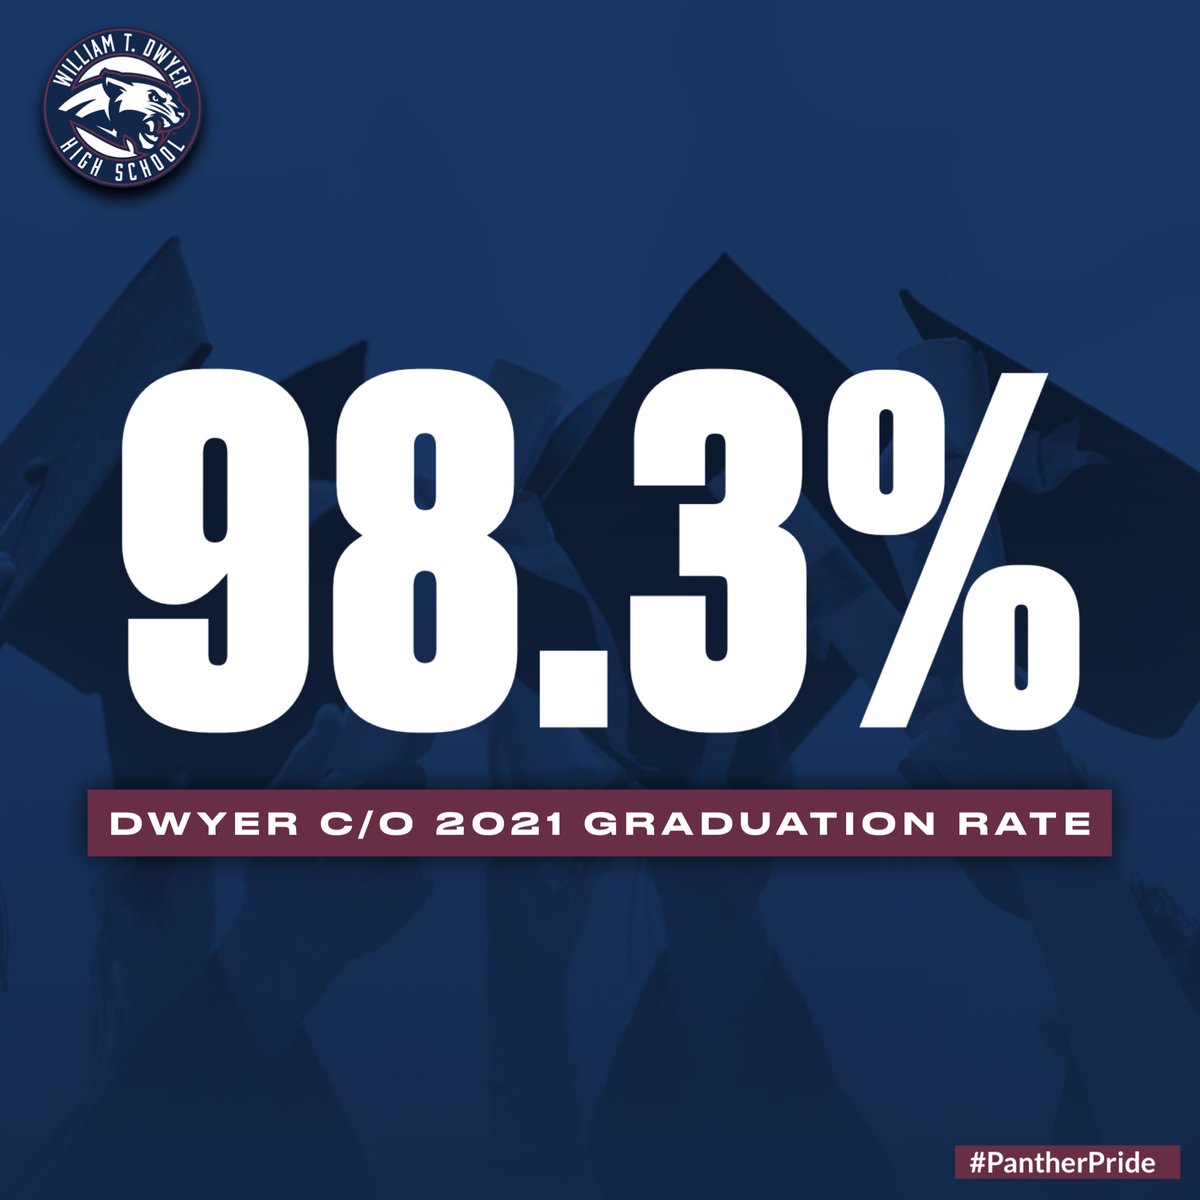 2021 Graduation rates have been released, and Dwyer’s C/O 2021 Graduation Rate is an outstanding 98.3%! Thank you to our students, teachers, staff, parents, and community members for your role and support in reaching this accomplishment. #WeAreDwyer #PantherPride